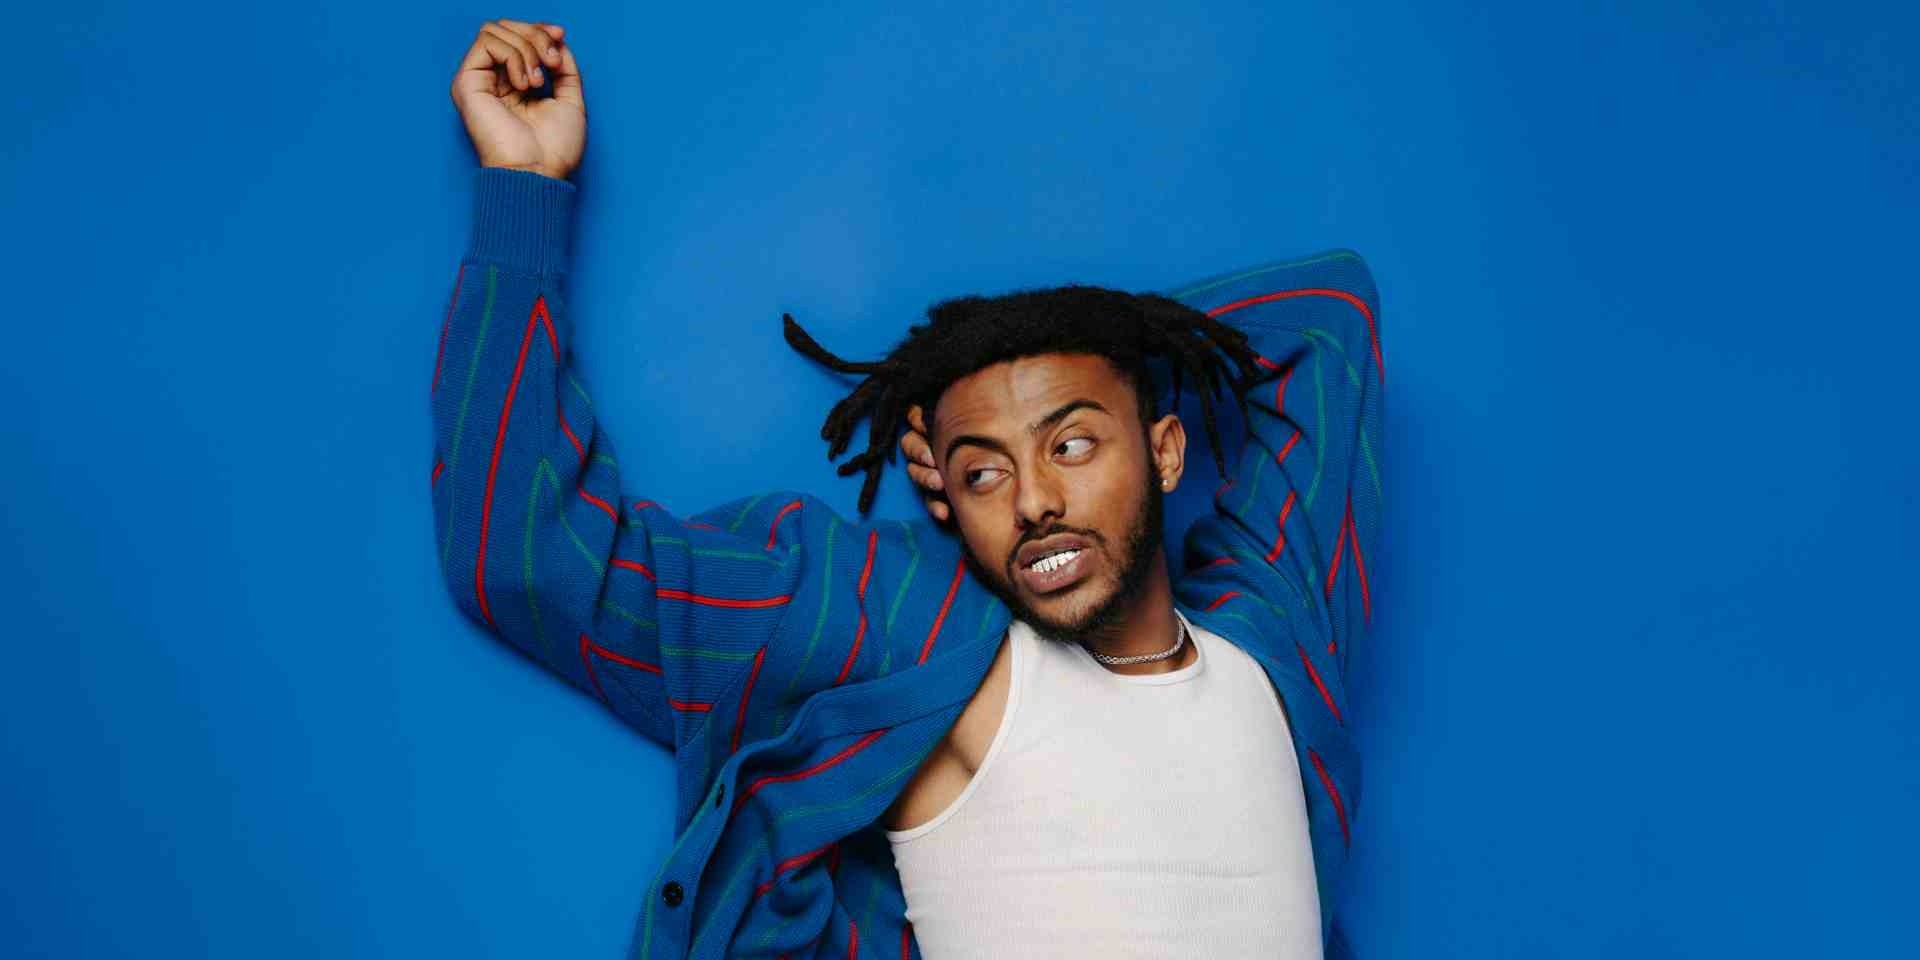 "I just want to make music that I love – not for attention": An interview with Aminé